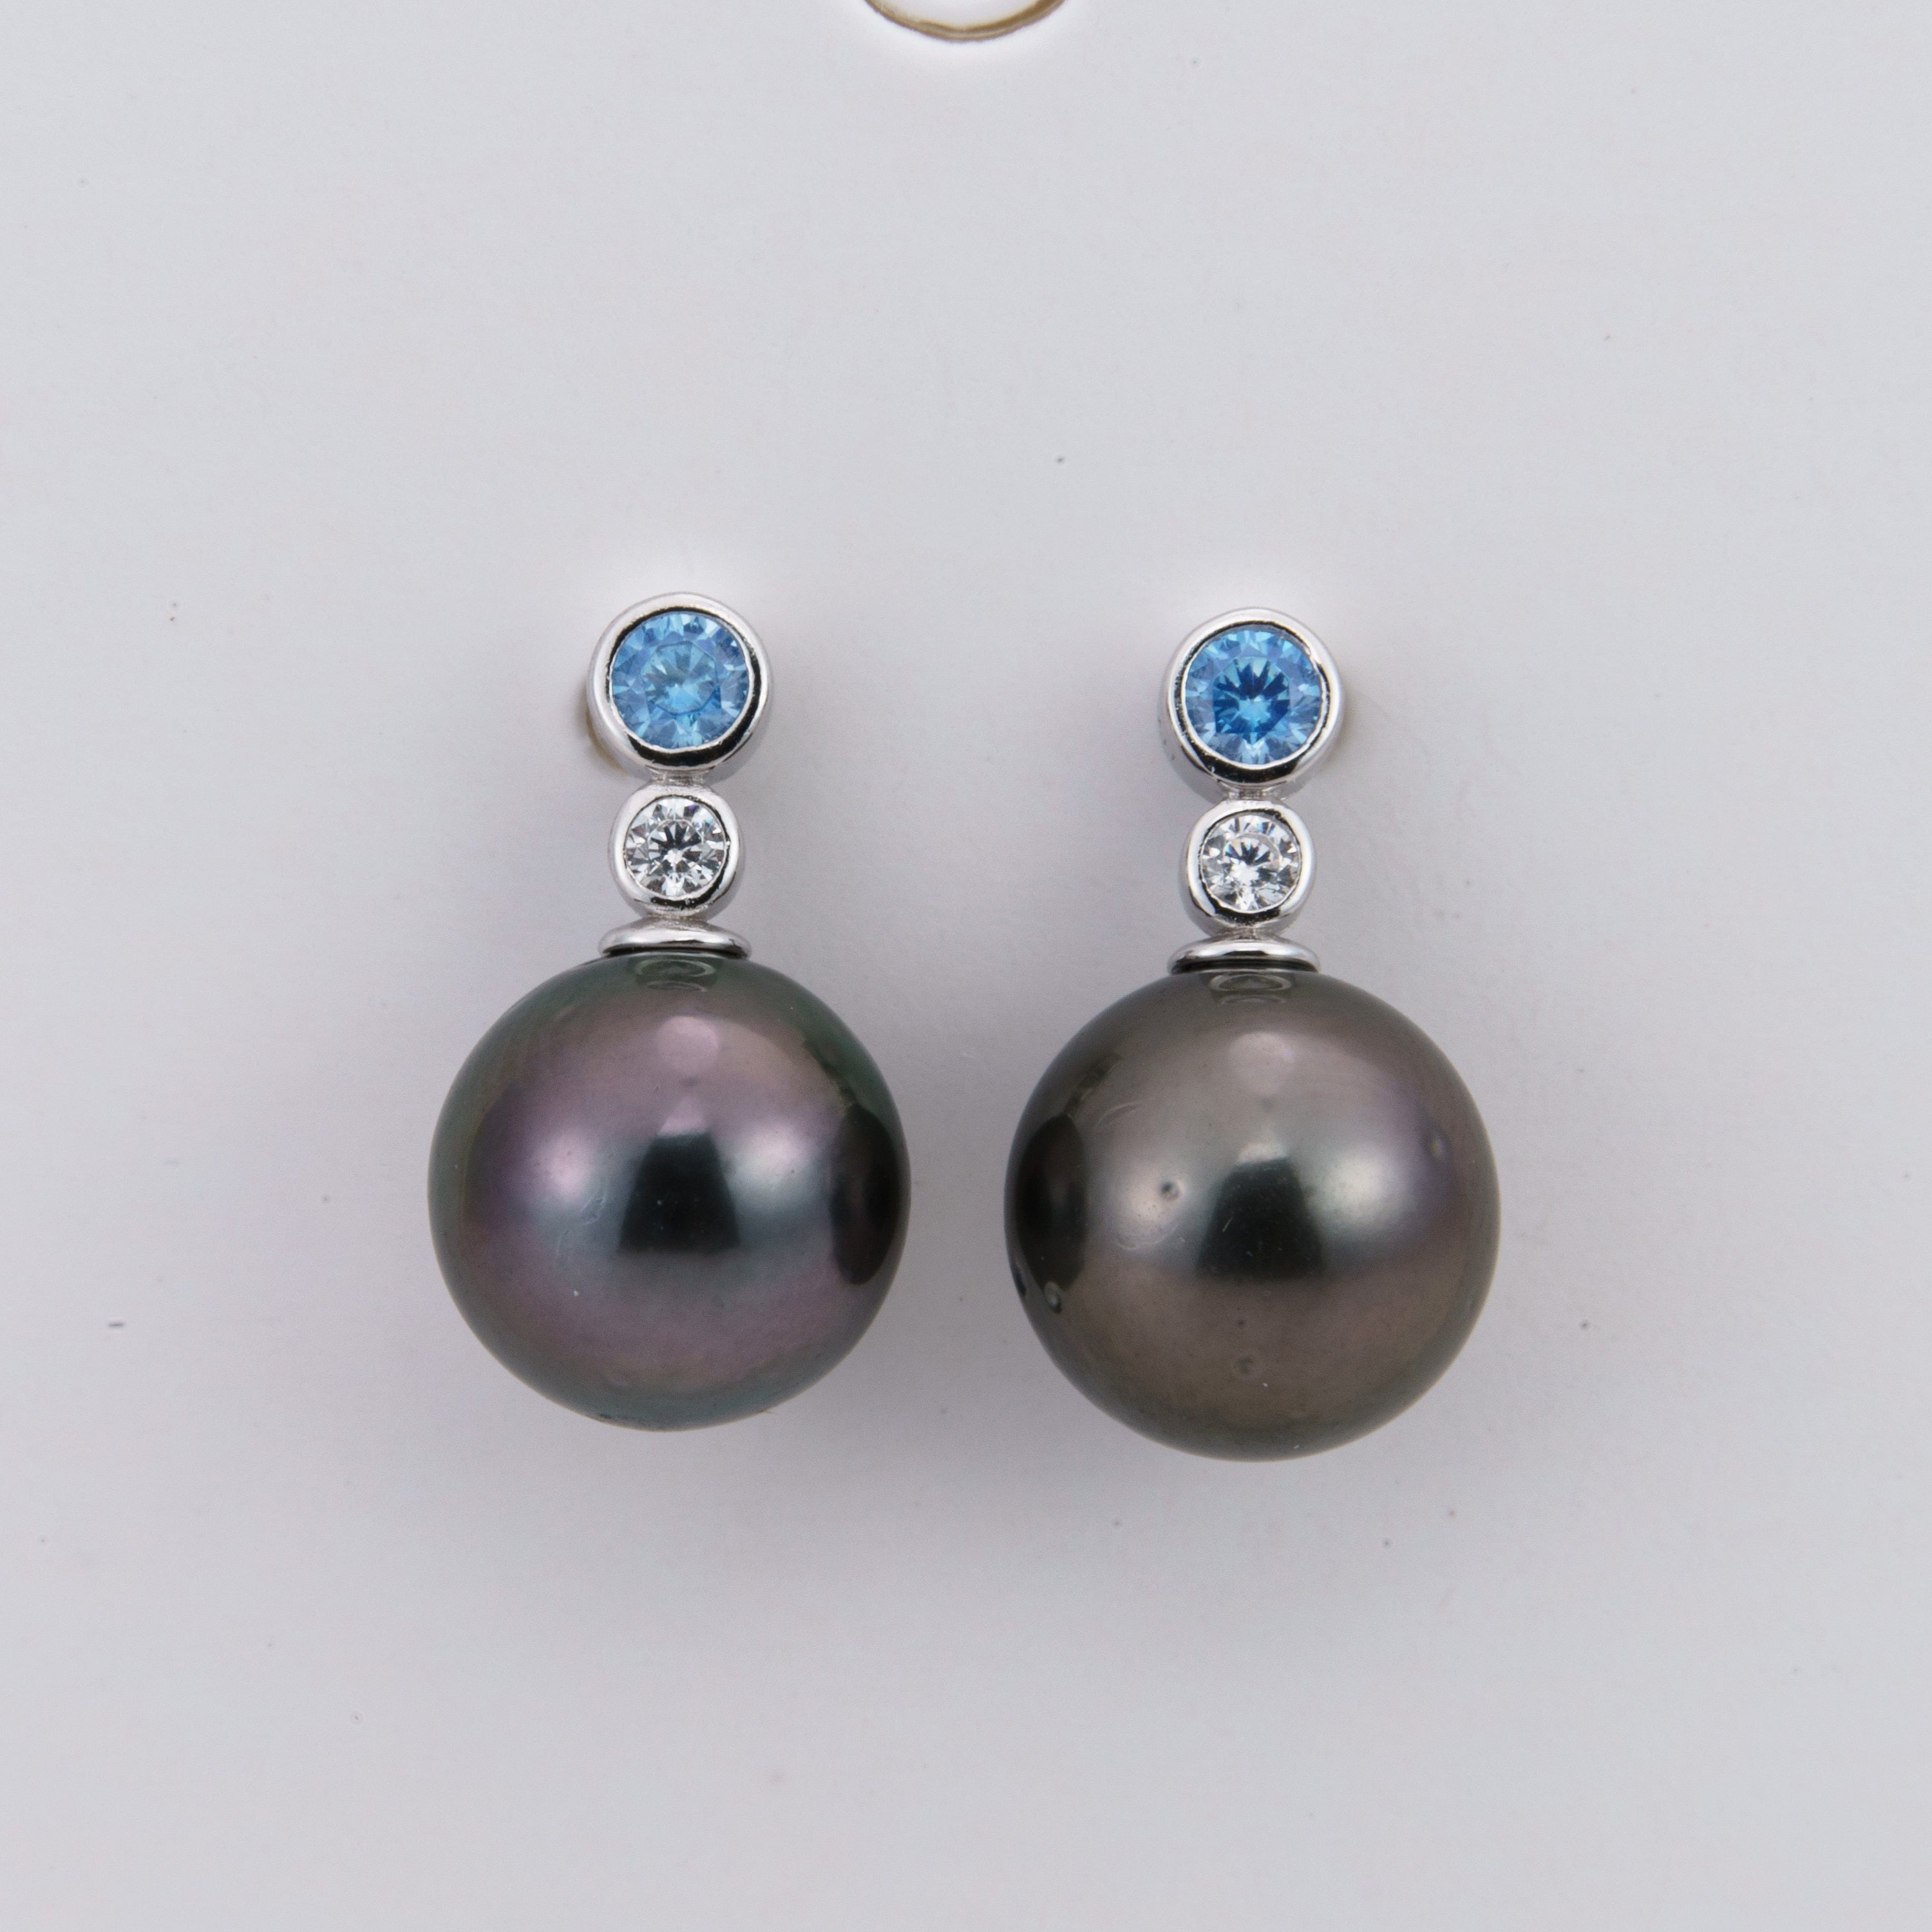 Tahitian pearl earrings 8mm, 925 sterling silver with rhodium finish and cubic zirconia